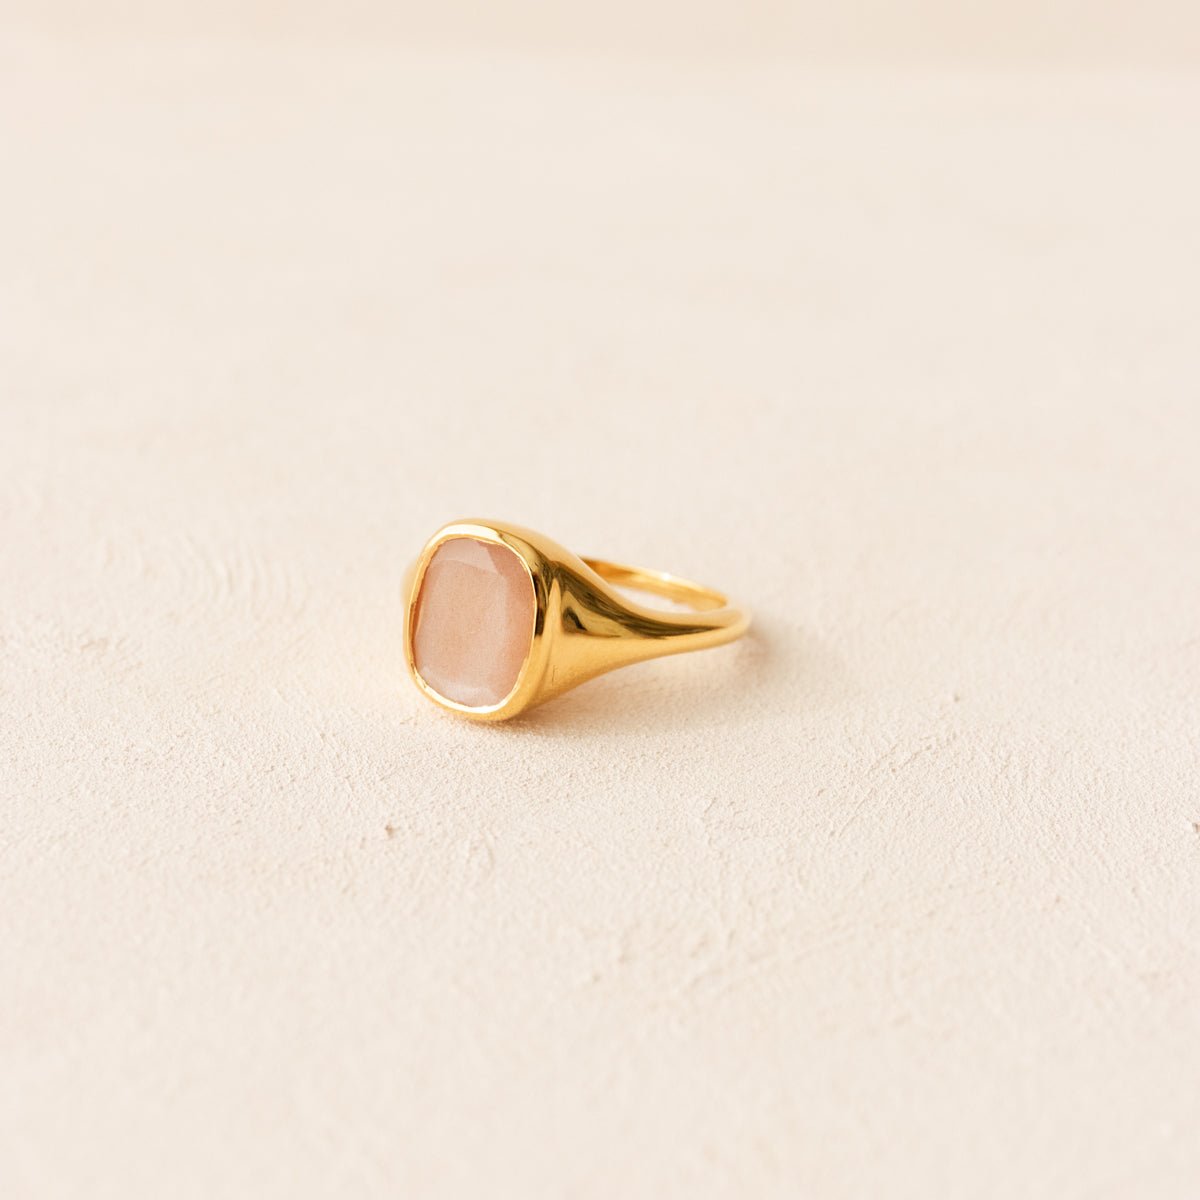 LOVE VINTAGE SIGNET RING - PEACH MOONSTONE &amp; GOLD - SO PRETTY CARA COTTER